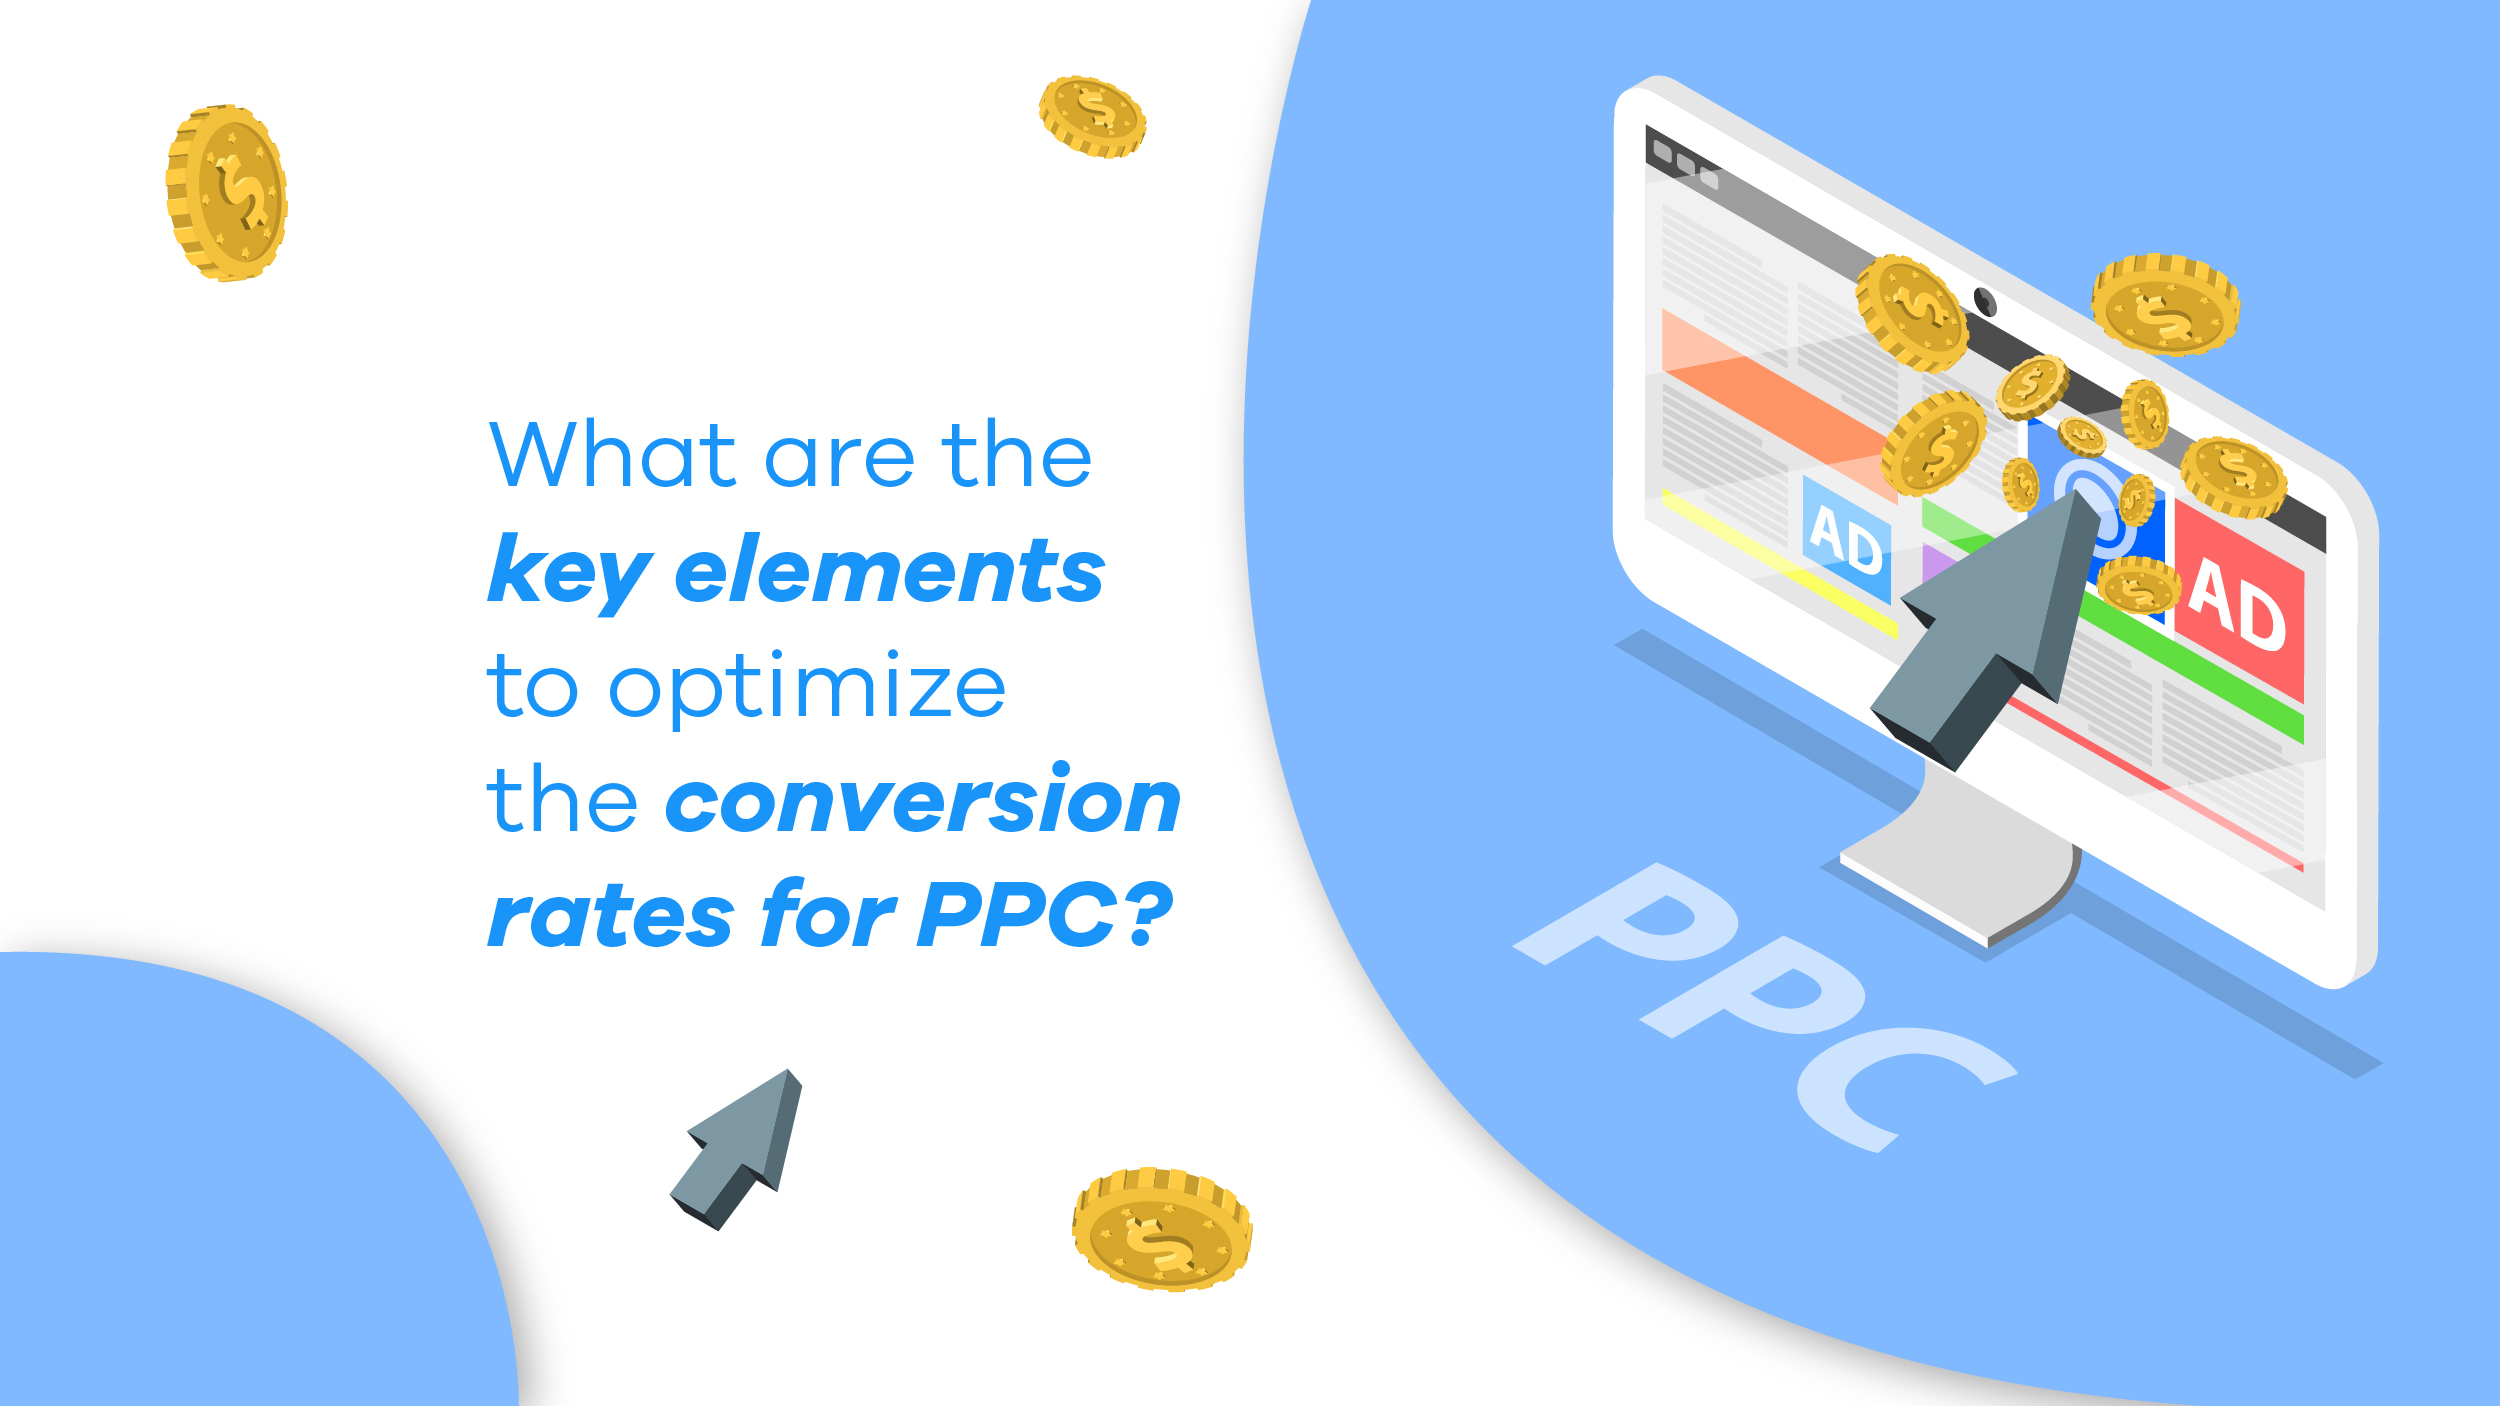 What are the key elements to optimize the conversion rates per PPC?